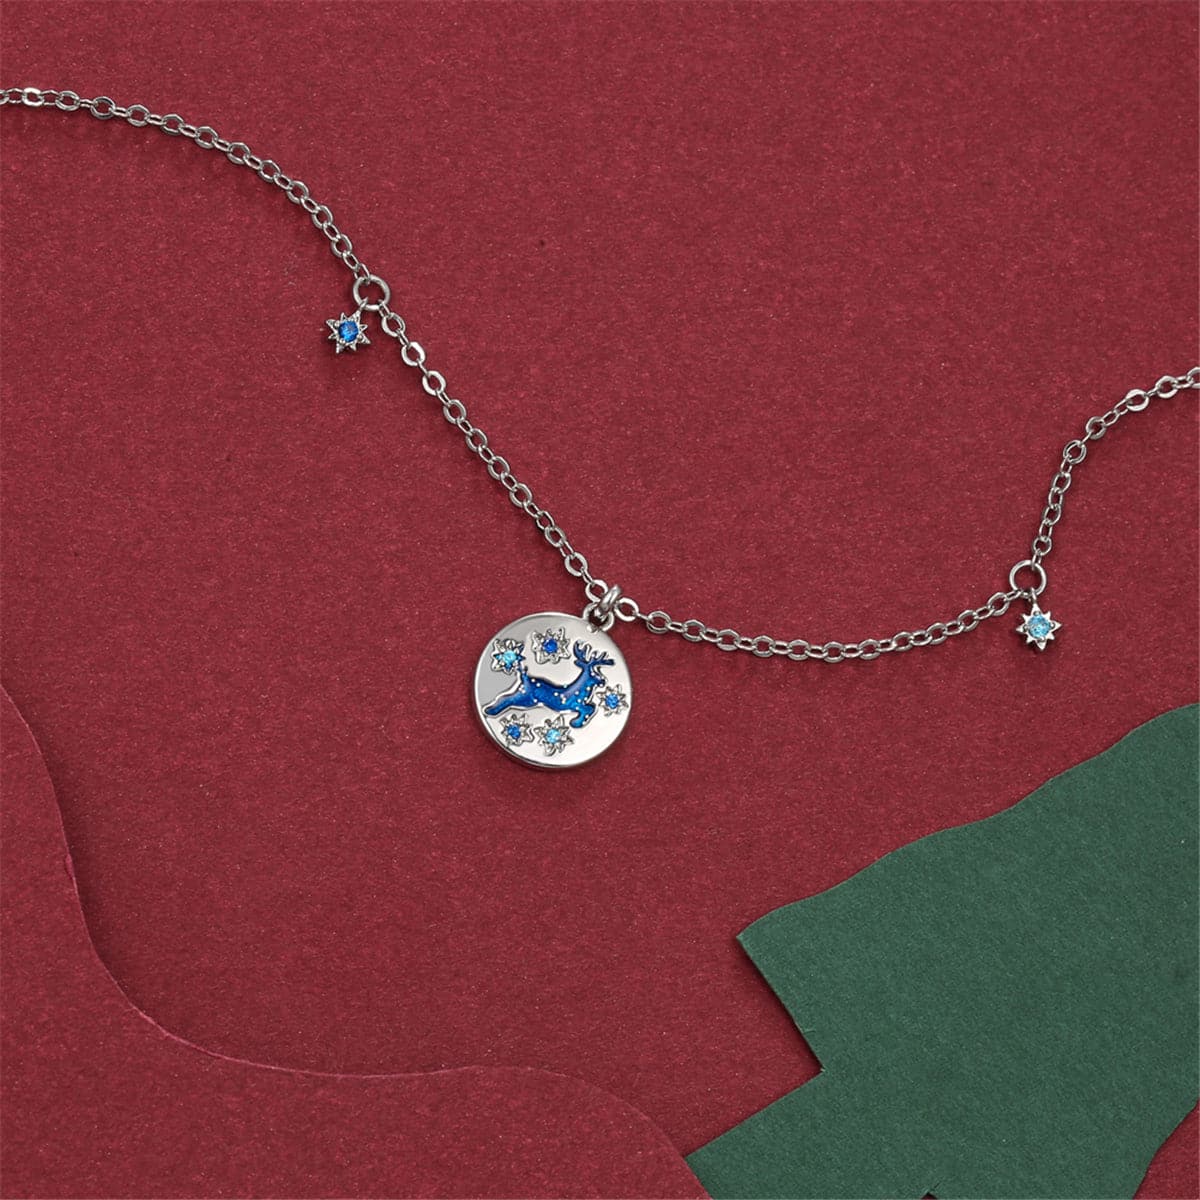 Blue Cubic Zirconia & Sterling Silver Reindeer Pendant Necklace